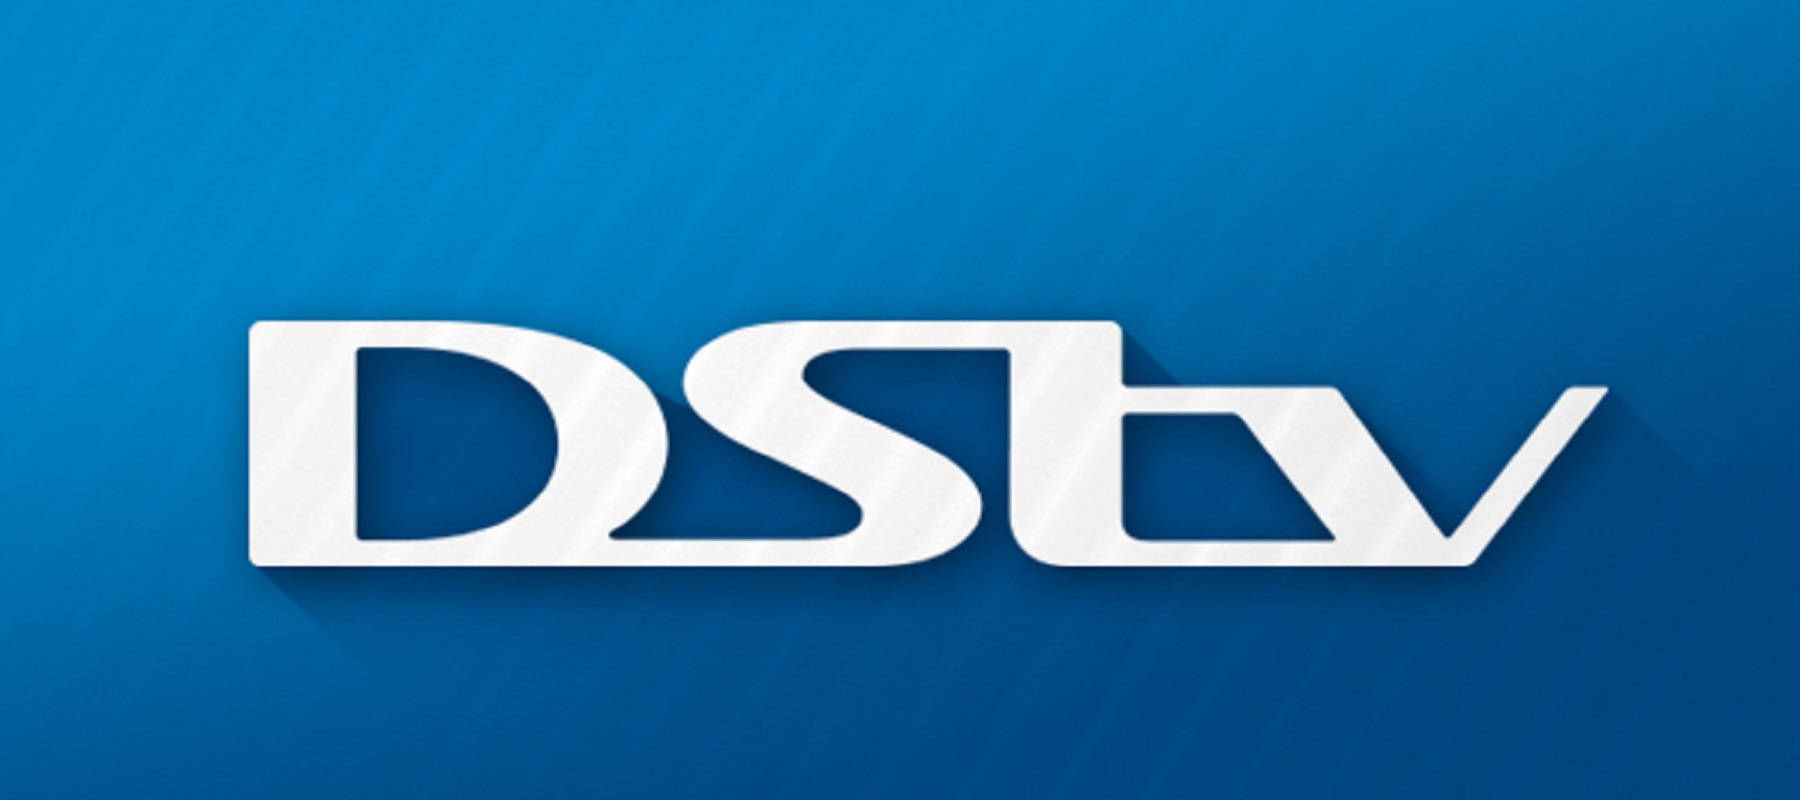 DSTV among the most admired African brands, report